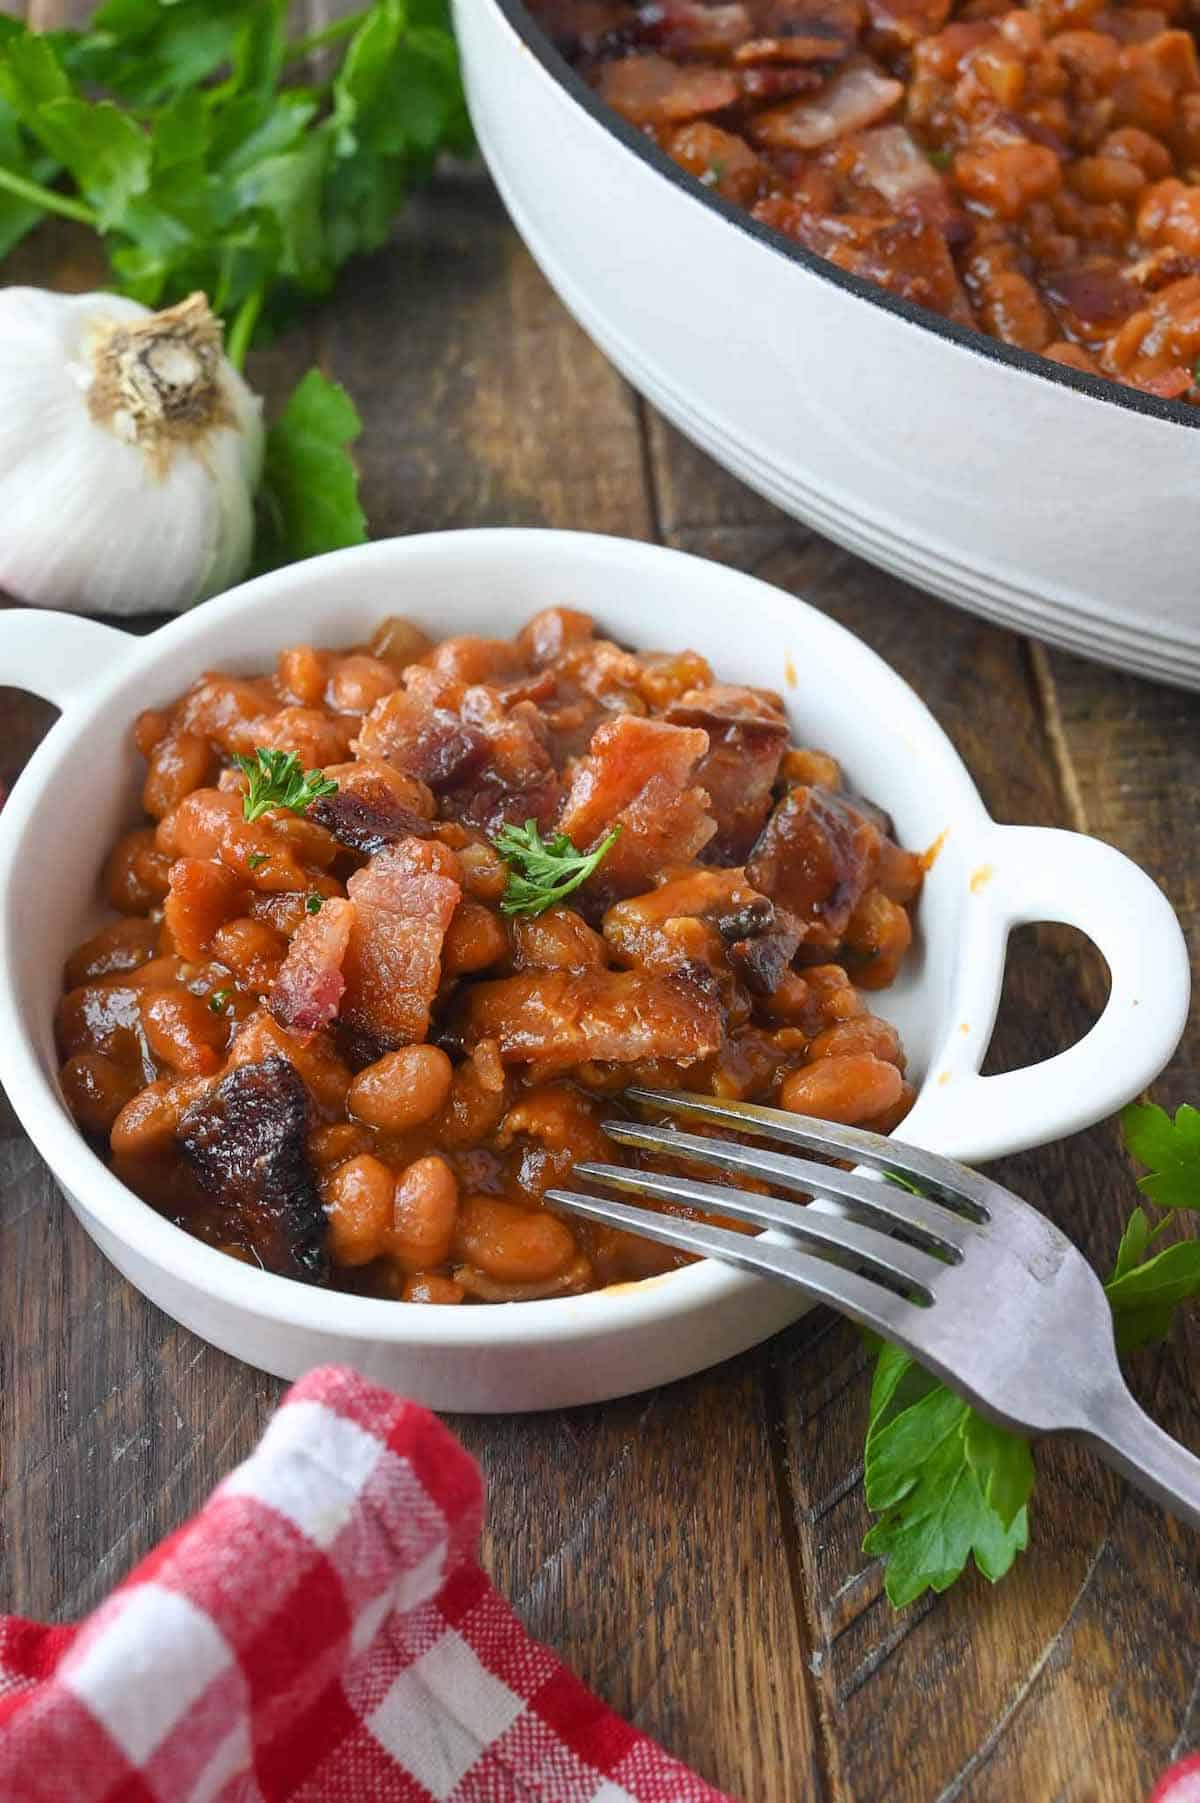 Baked beans in a small white dish with a fork.